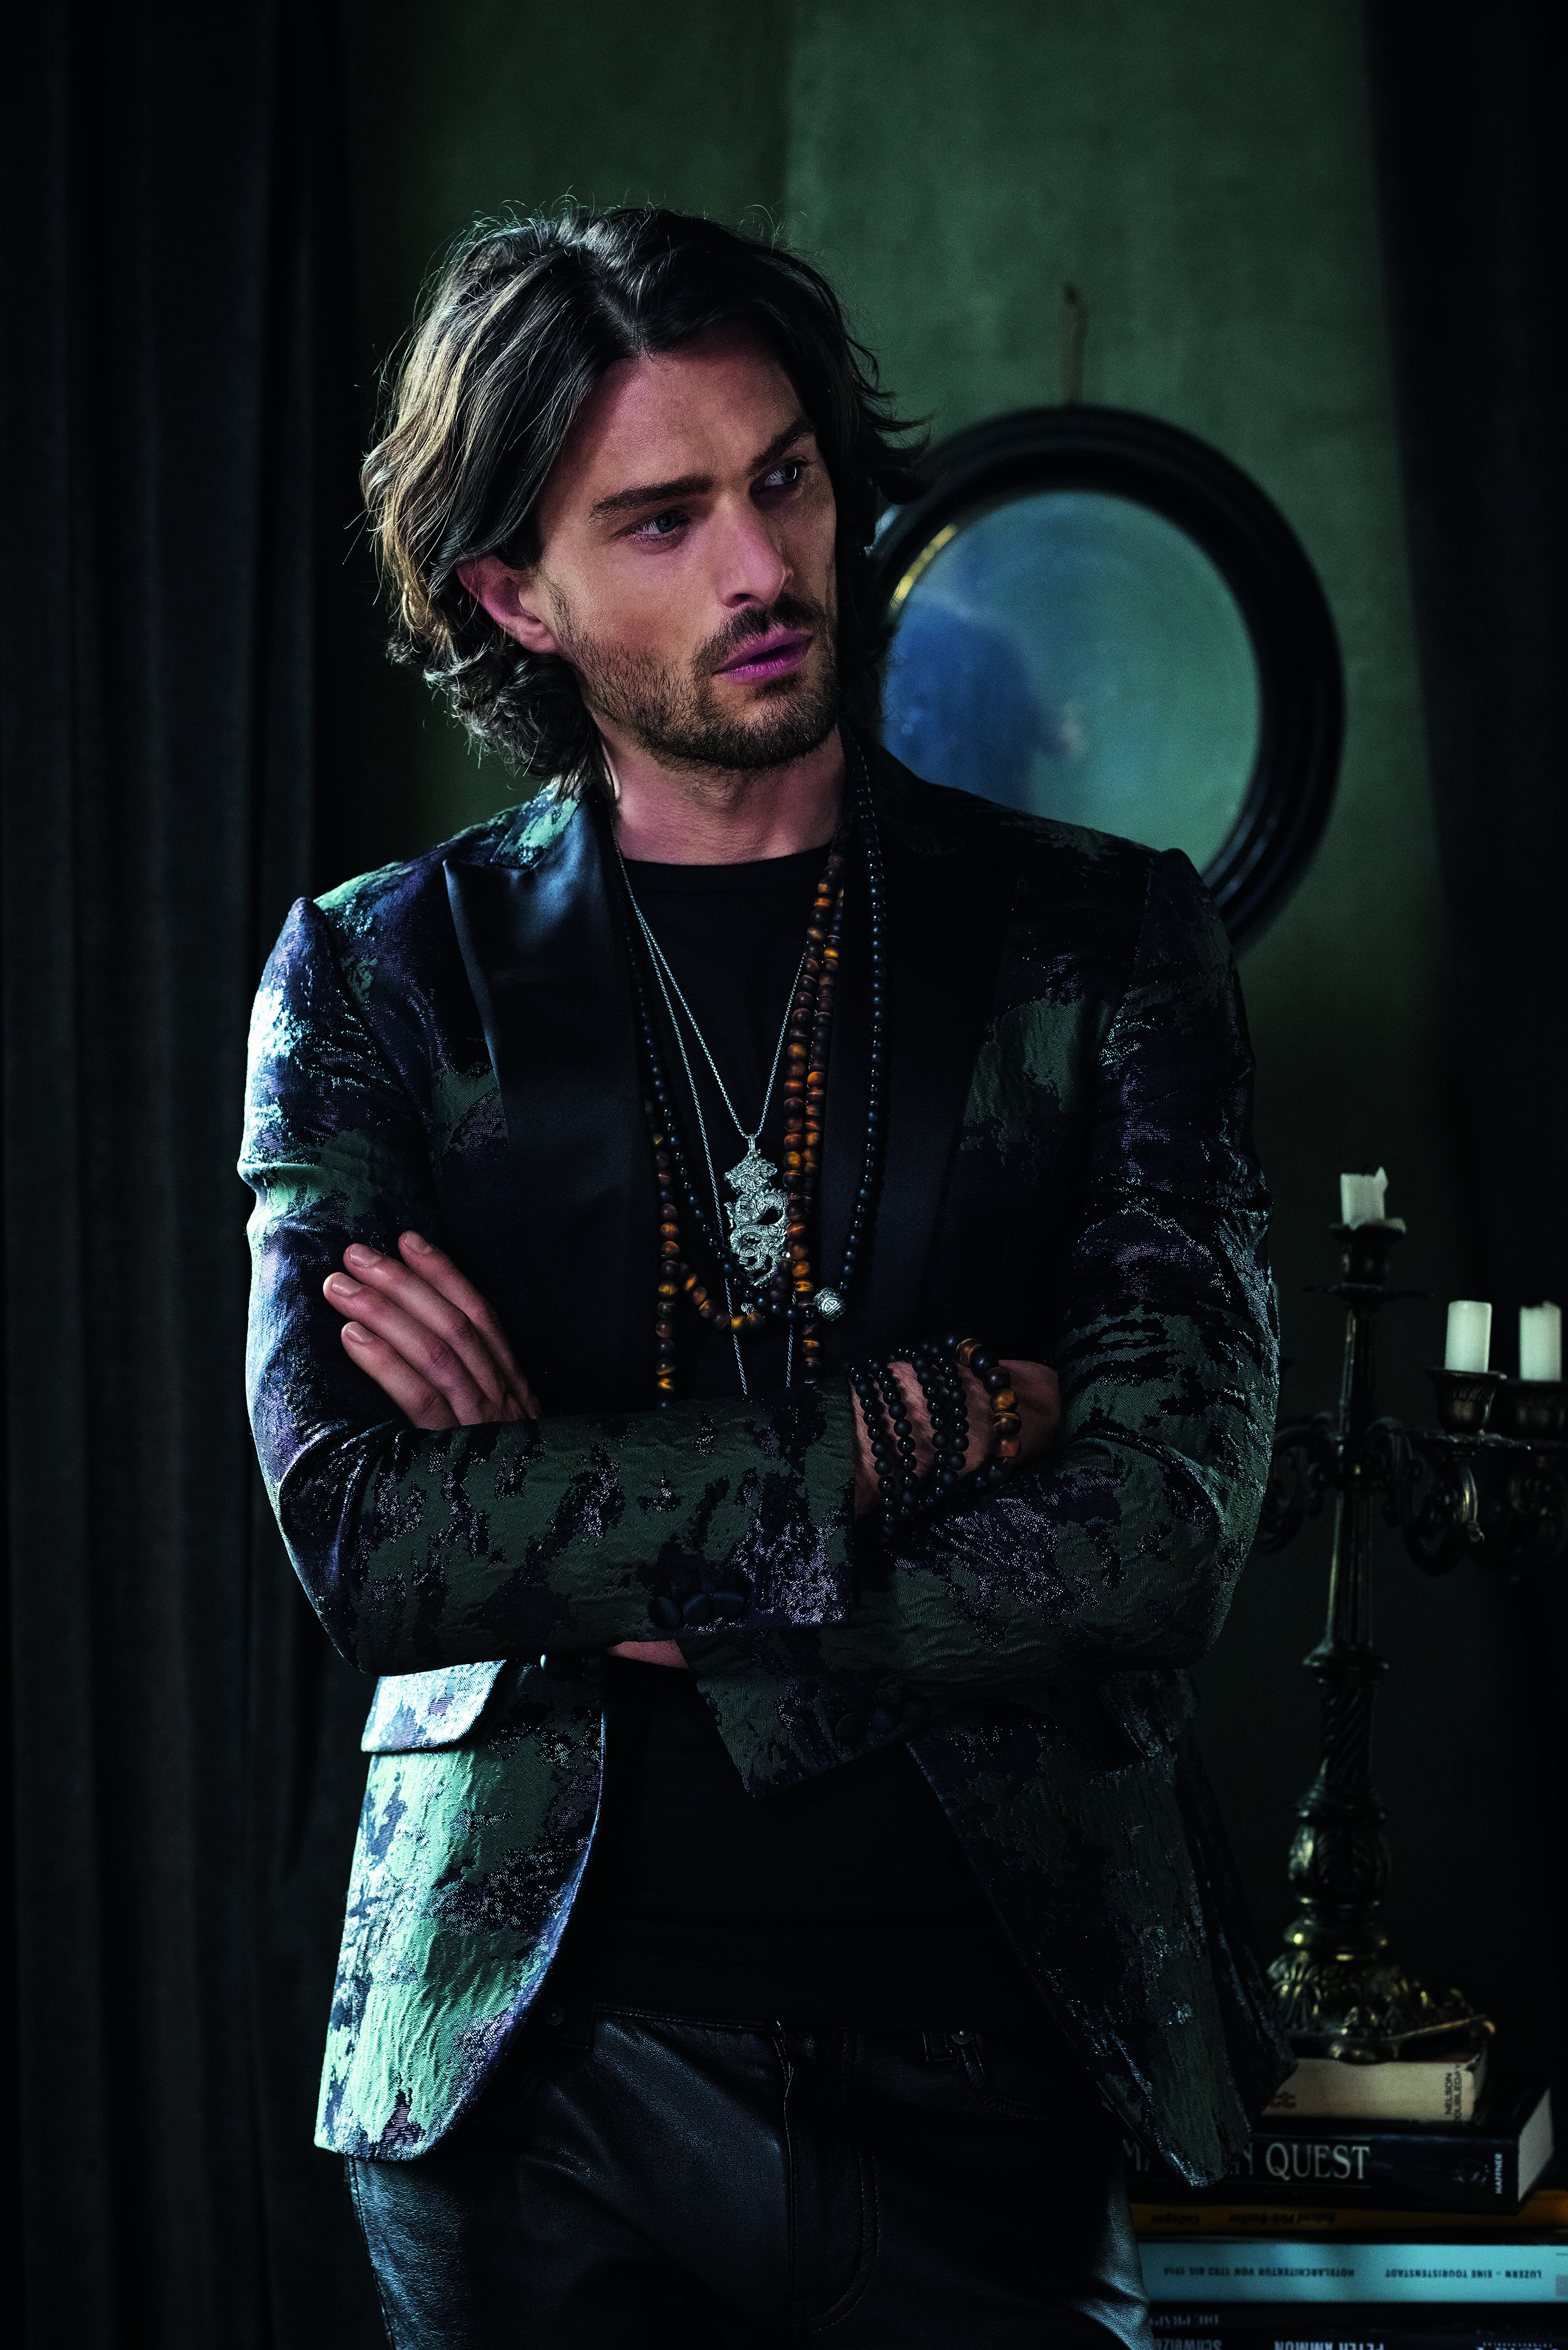 Thomas Sabo's pieces for men exude confidence and personal style